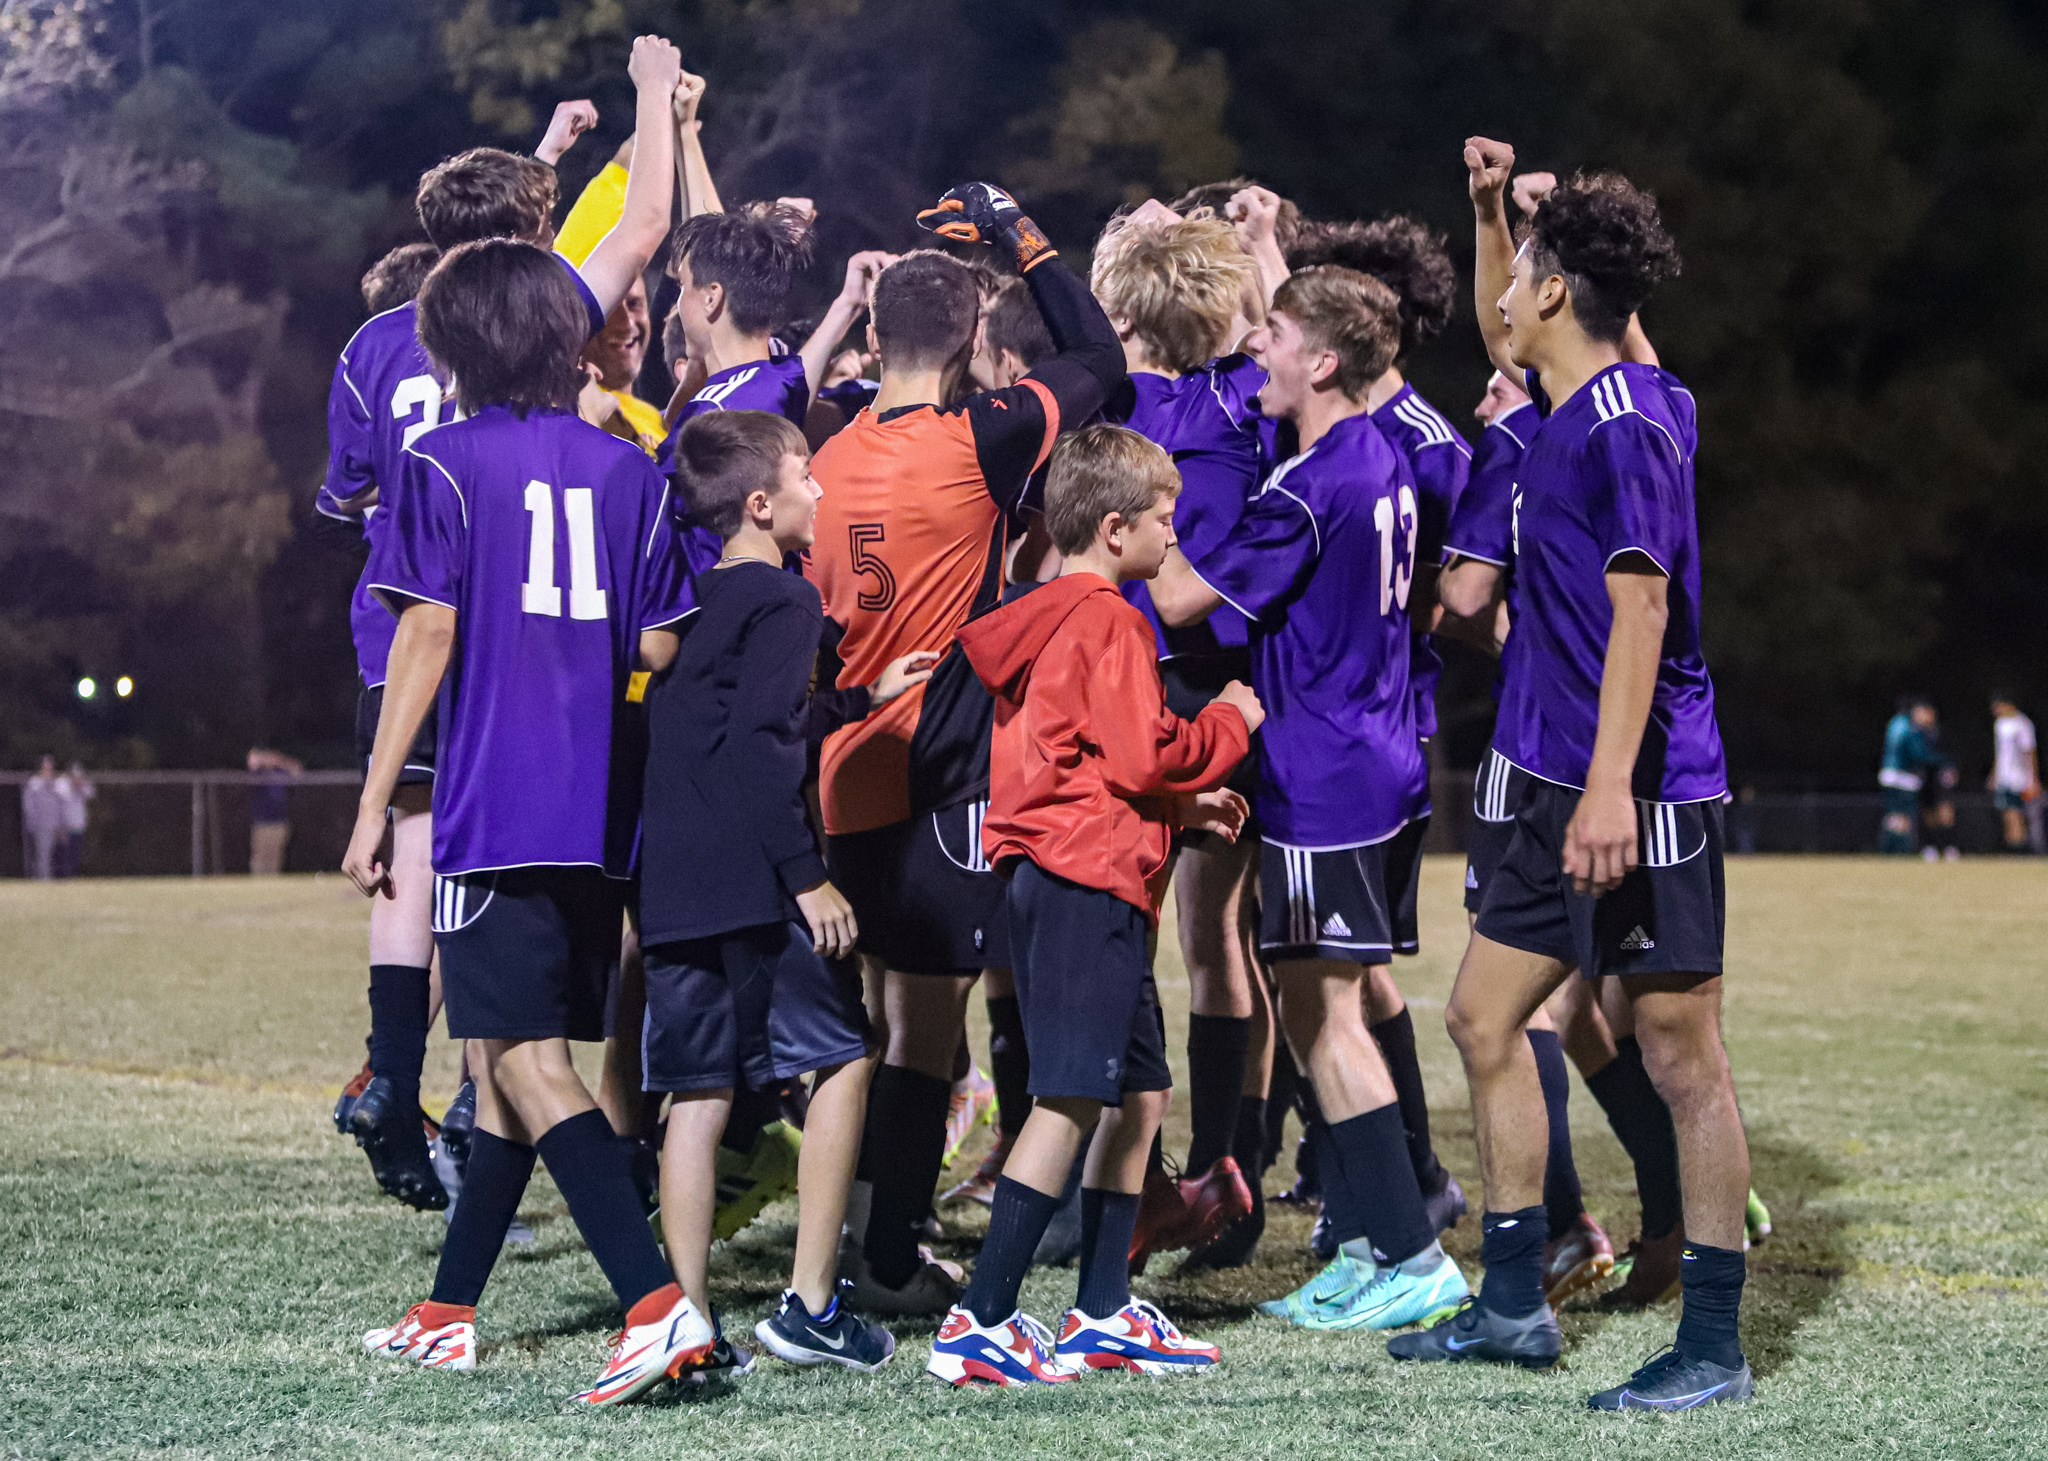 Boys Soccer: Rosewood Reaches Regional Championship Round For First Time In Program History (PHOTO GALLERY)